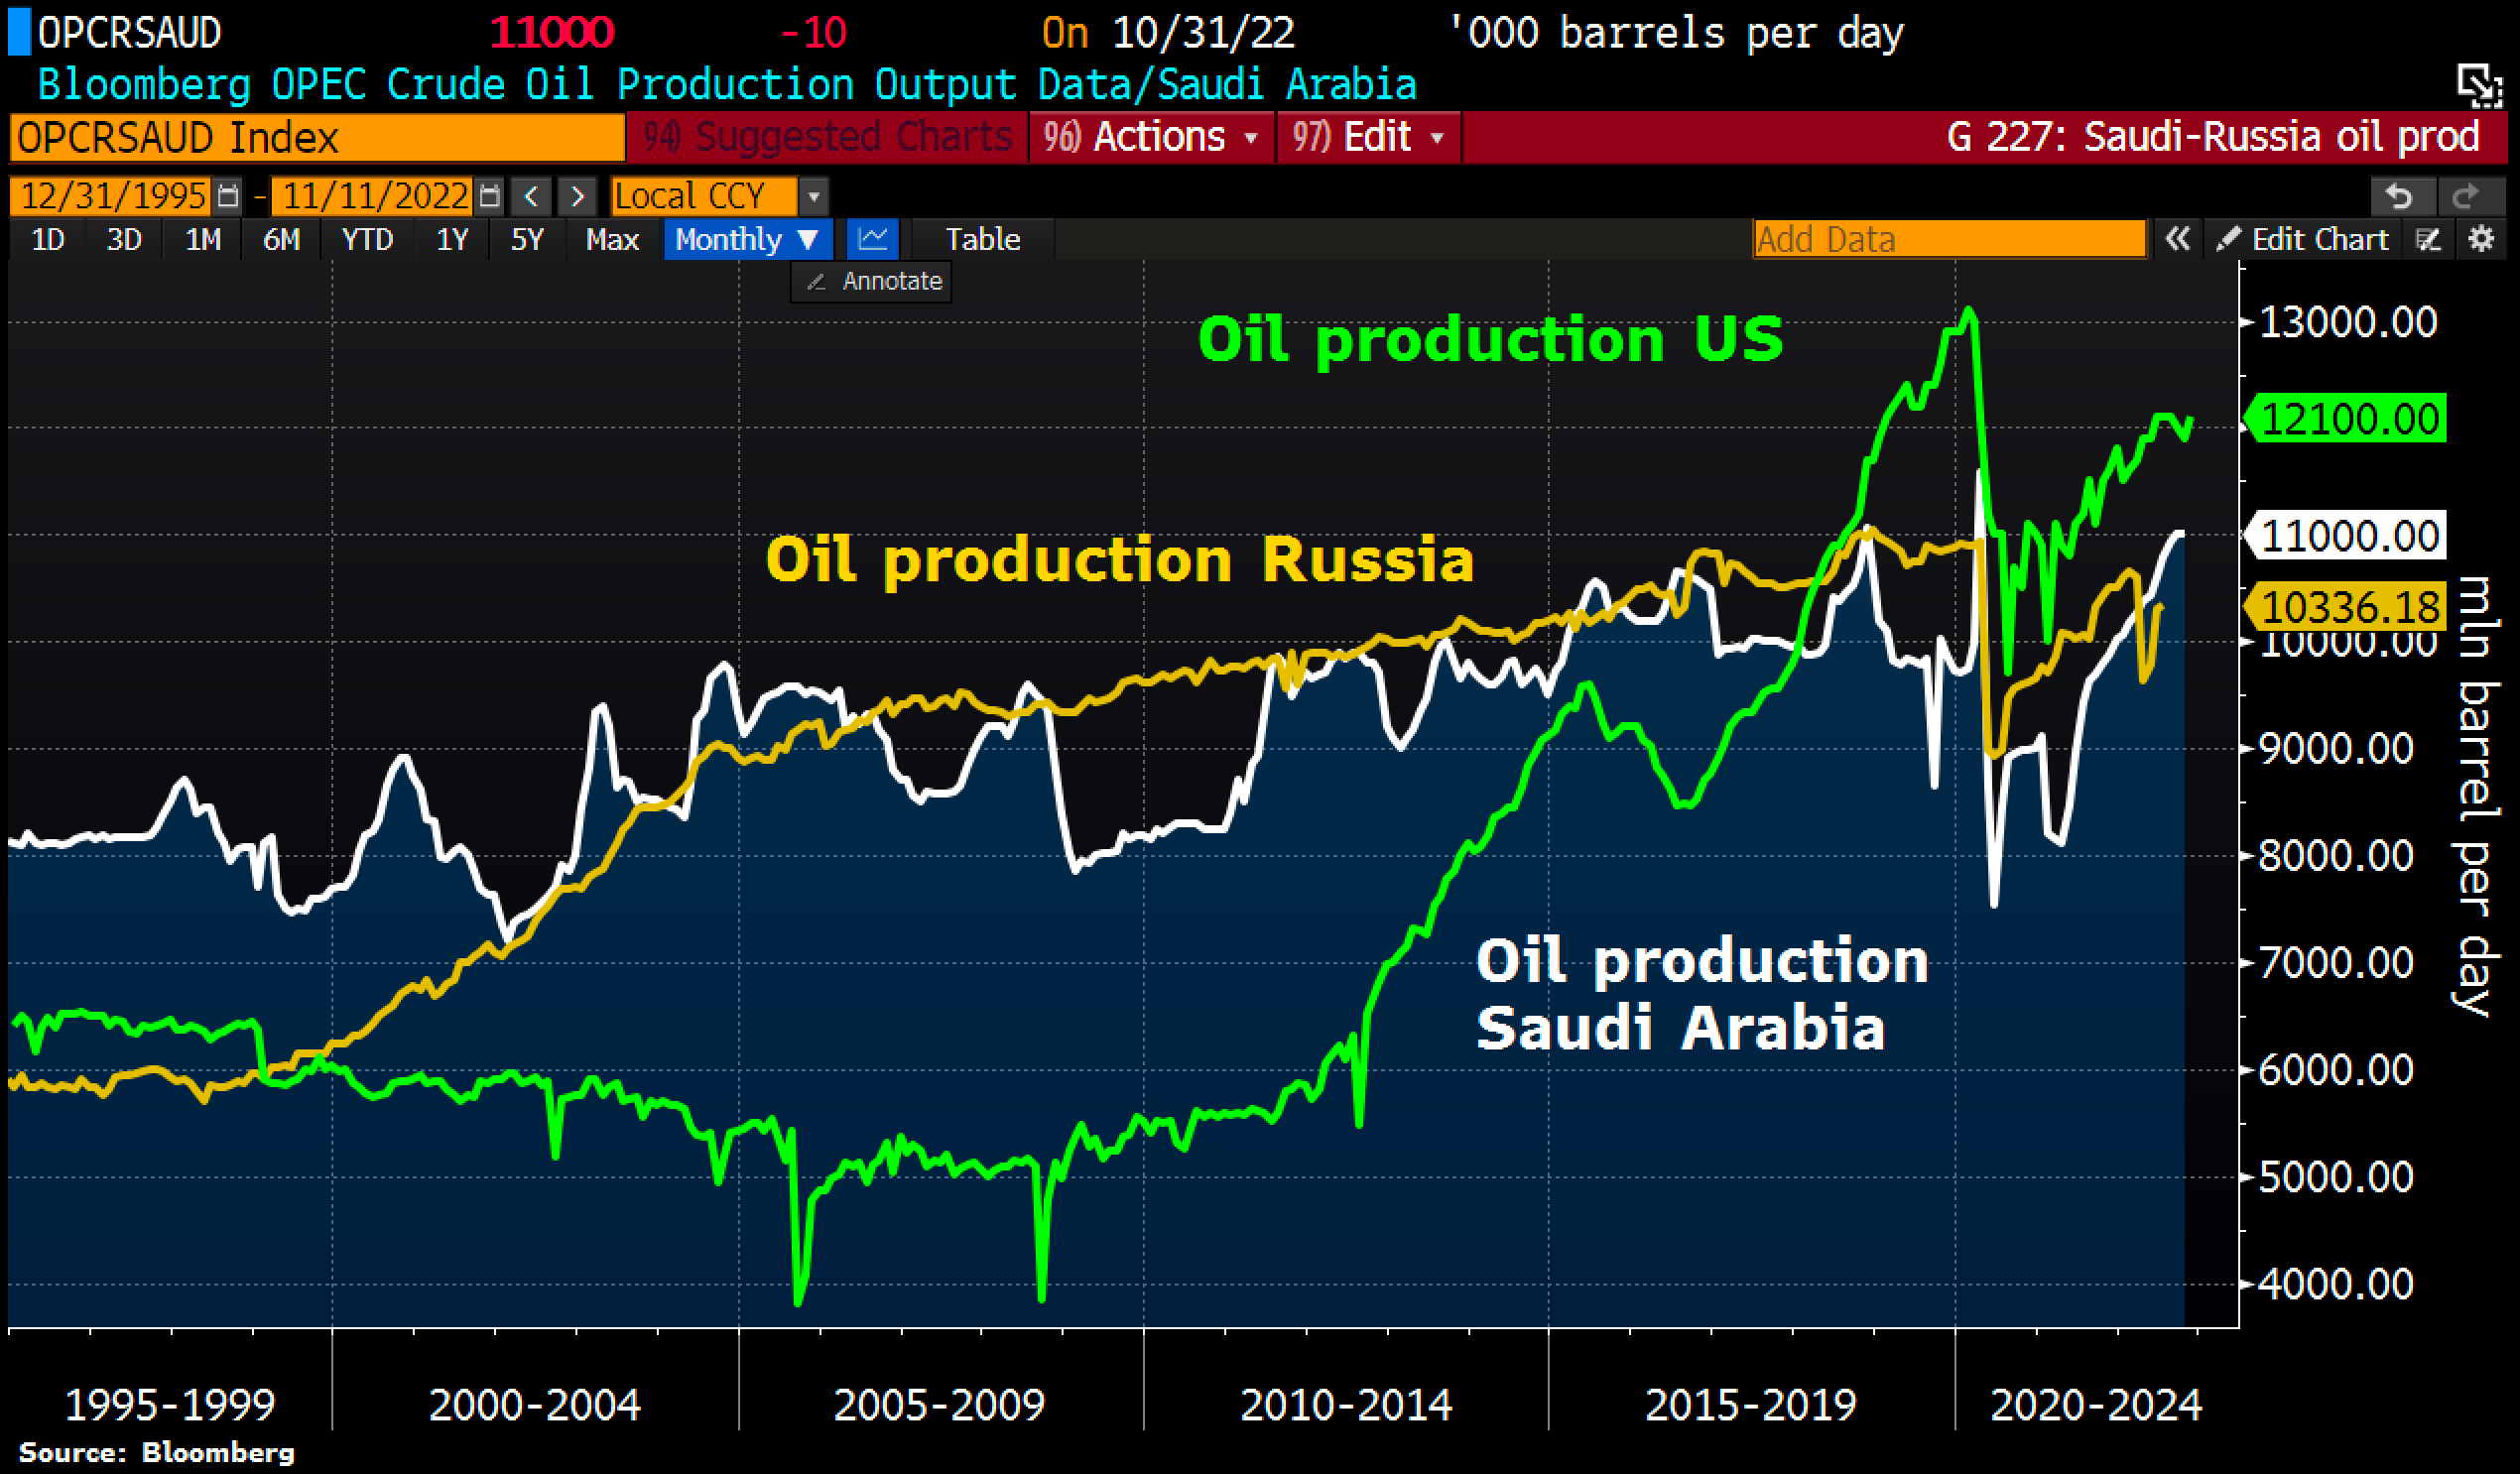 @rose98734/saudi-looks-like-it-s-going-to-dominate-oil-production-going-forward